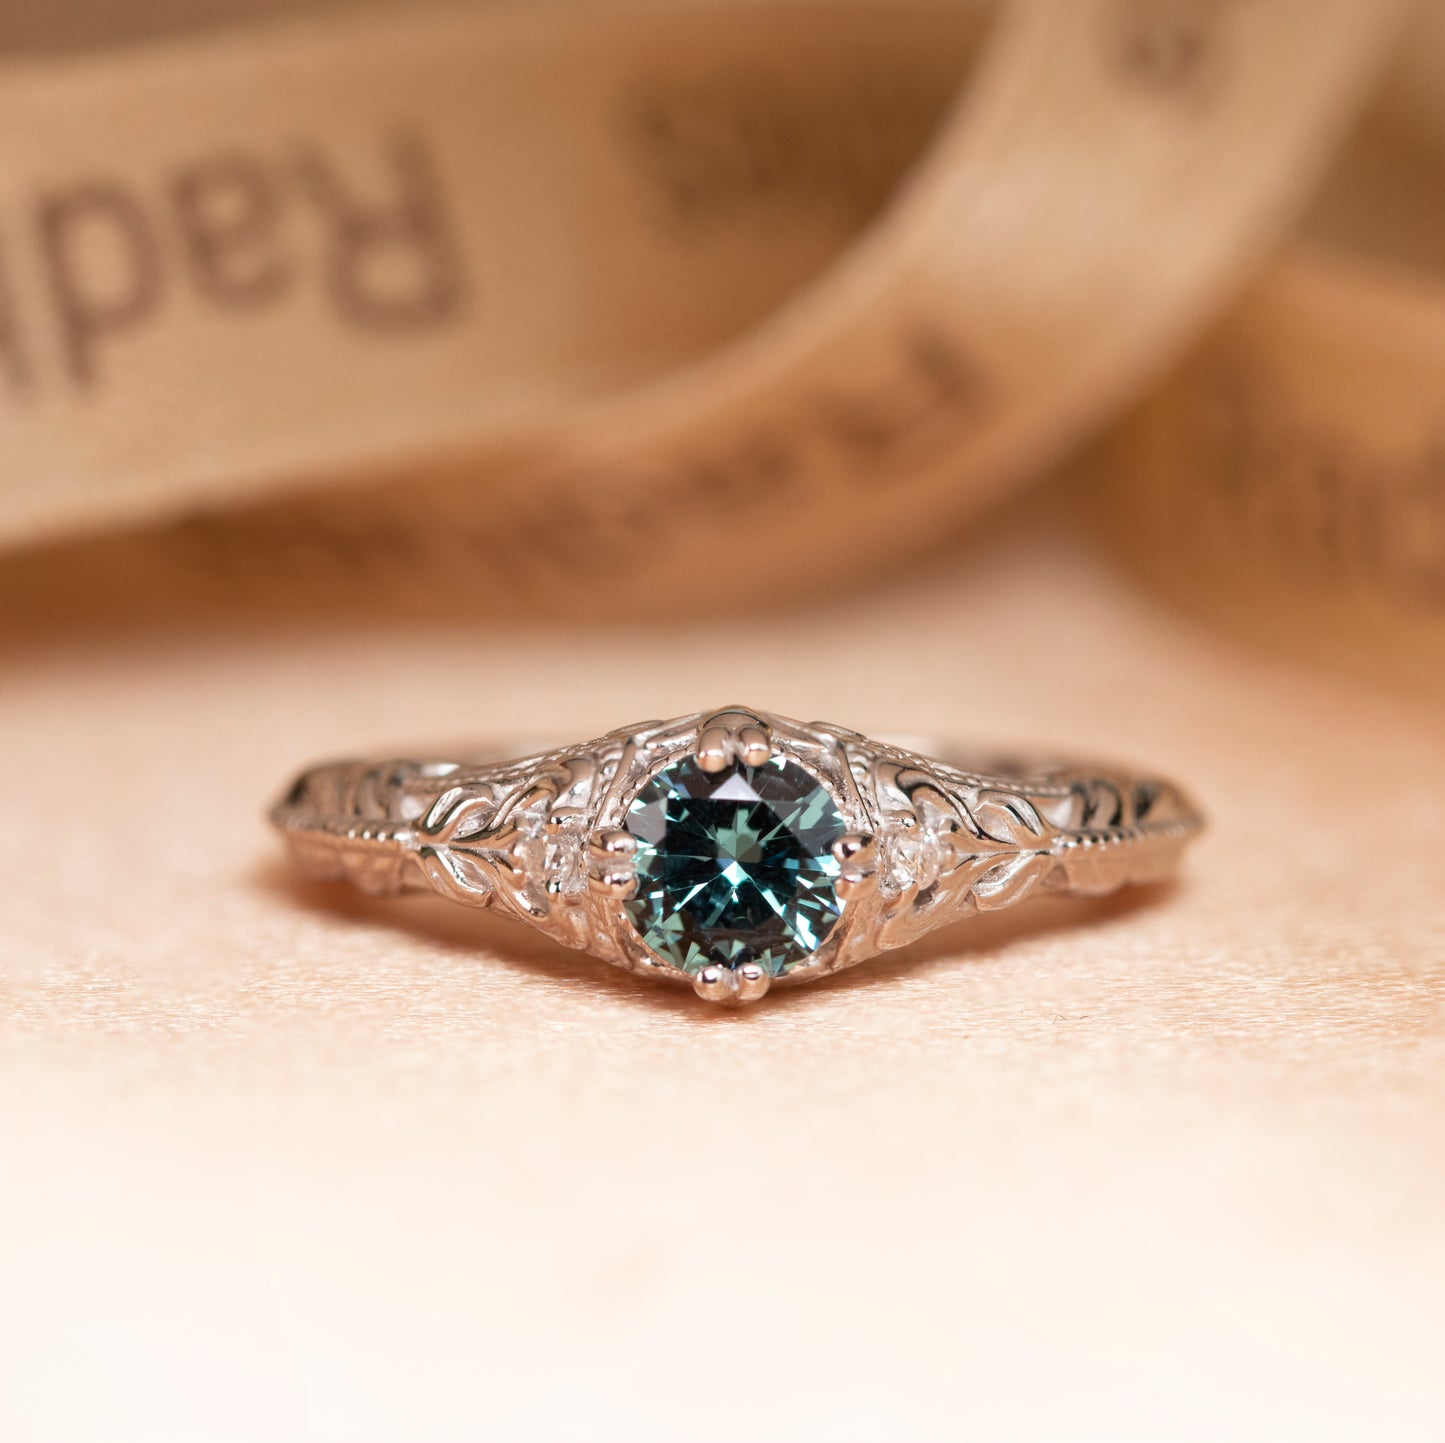 Delicate 1 carat Round Shaped Alexandrite and Diamond Nature-inspired Vintage Ring in White Gold